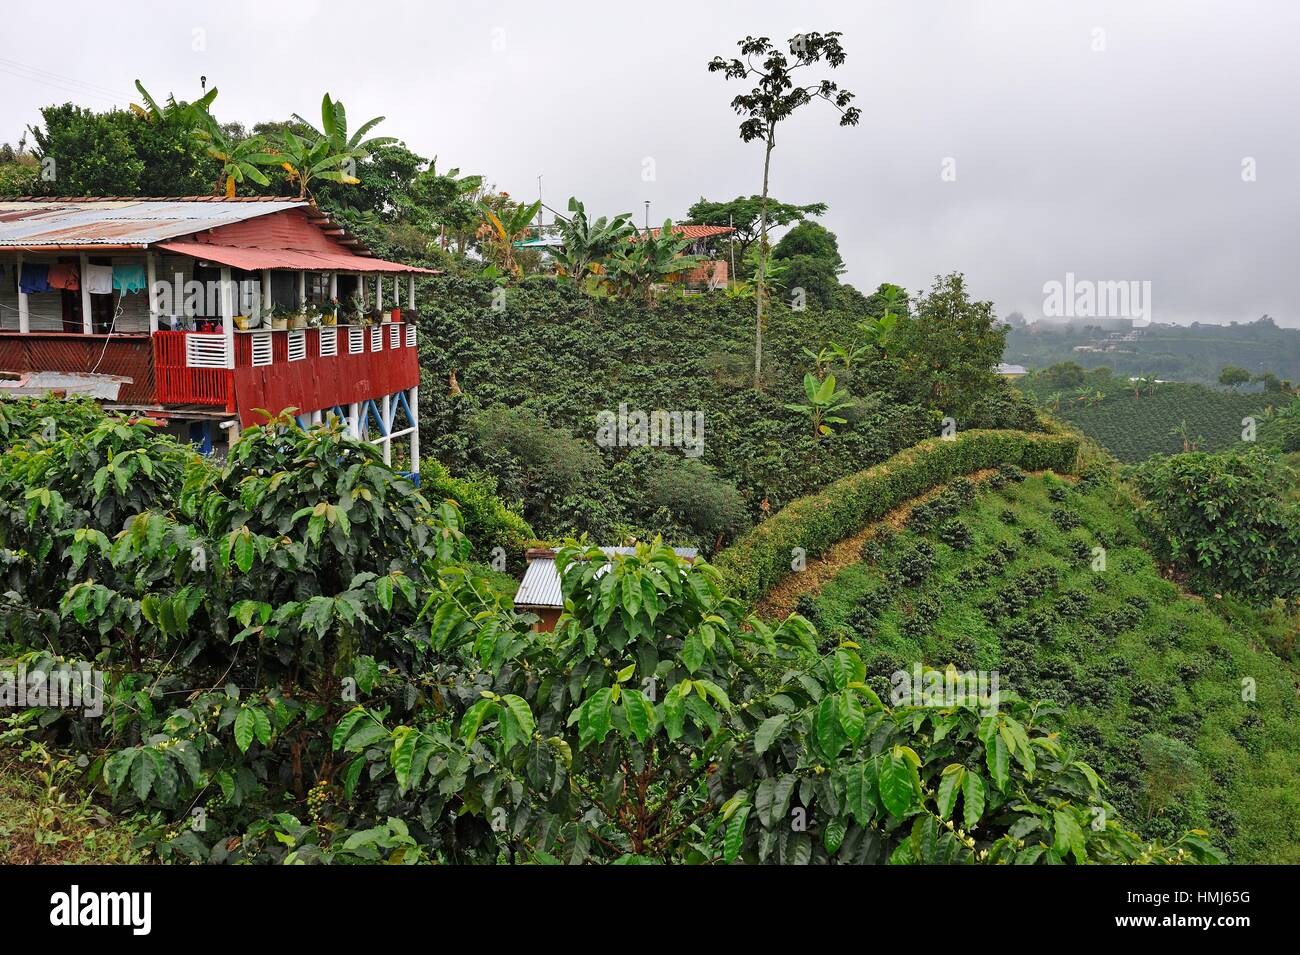 coffee plantation in the region of Armenia, department of Quindio,  Cordillera Central of the Andes mountain range, Colombia, South America  Stock Photo - Alamy